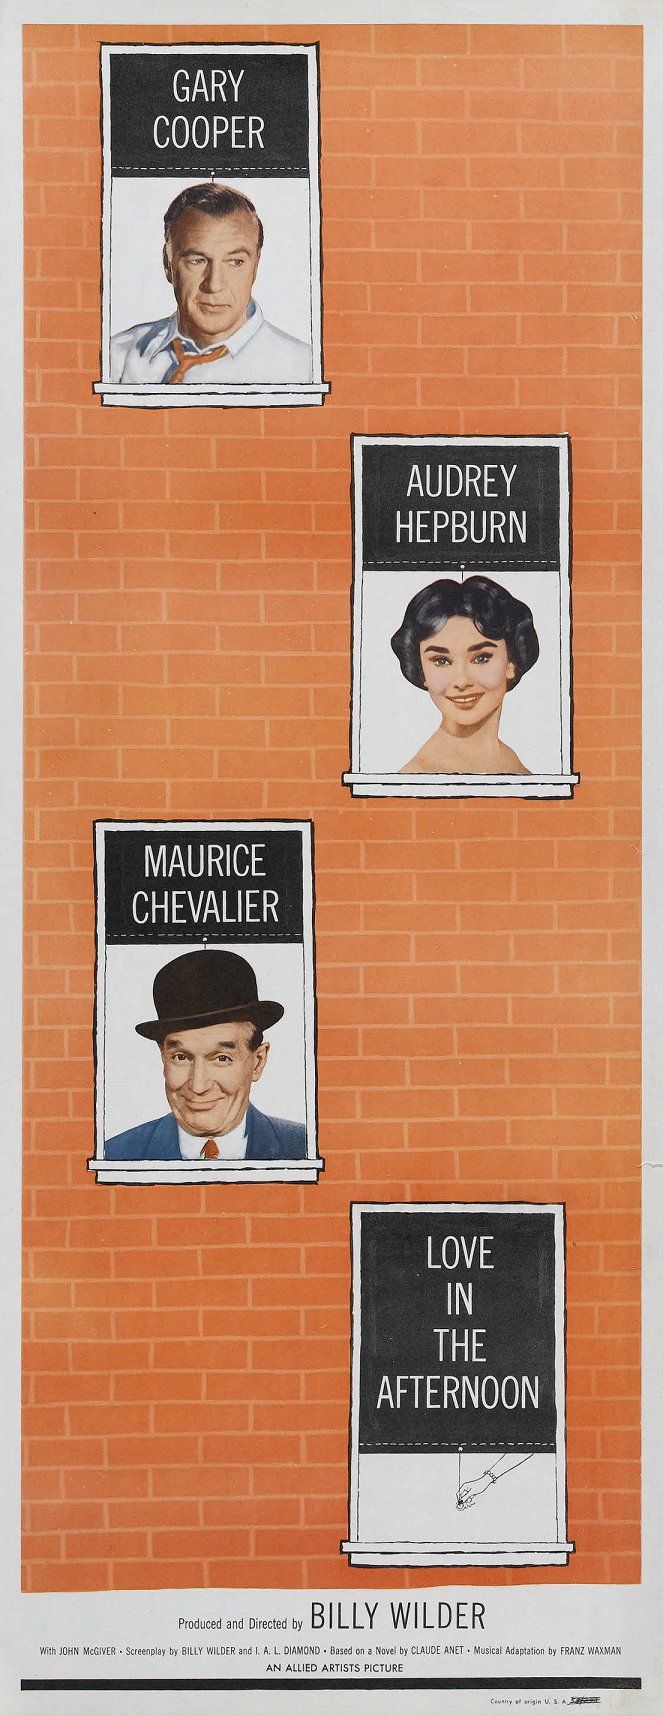 Love in the Afternoon - Posters